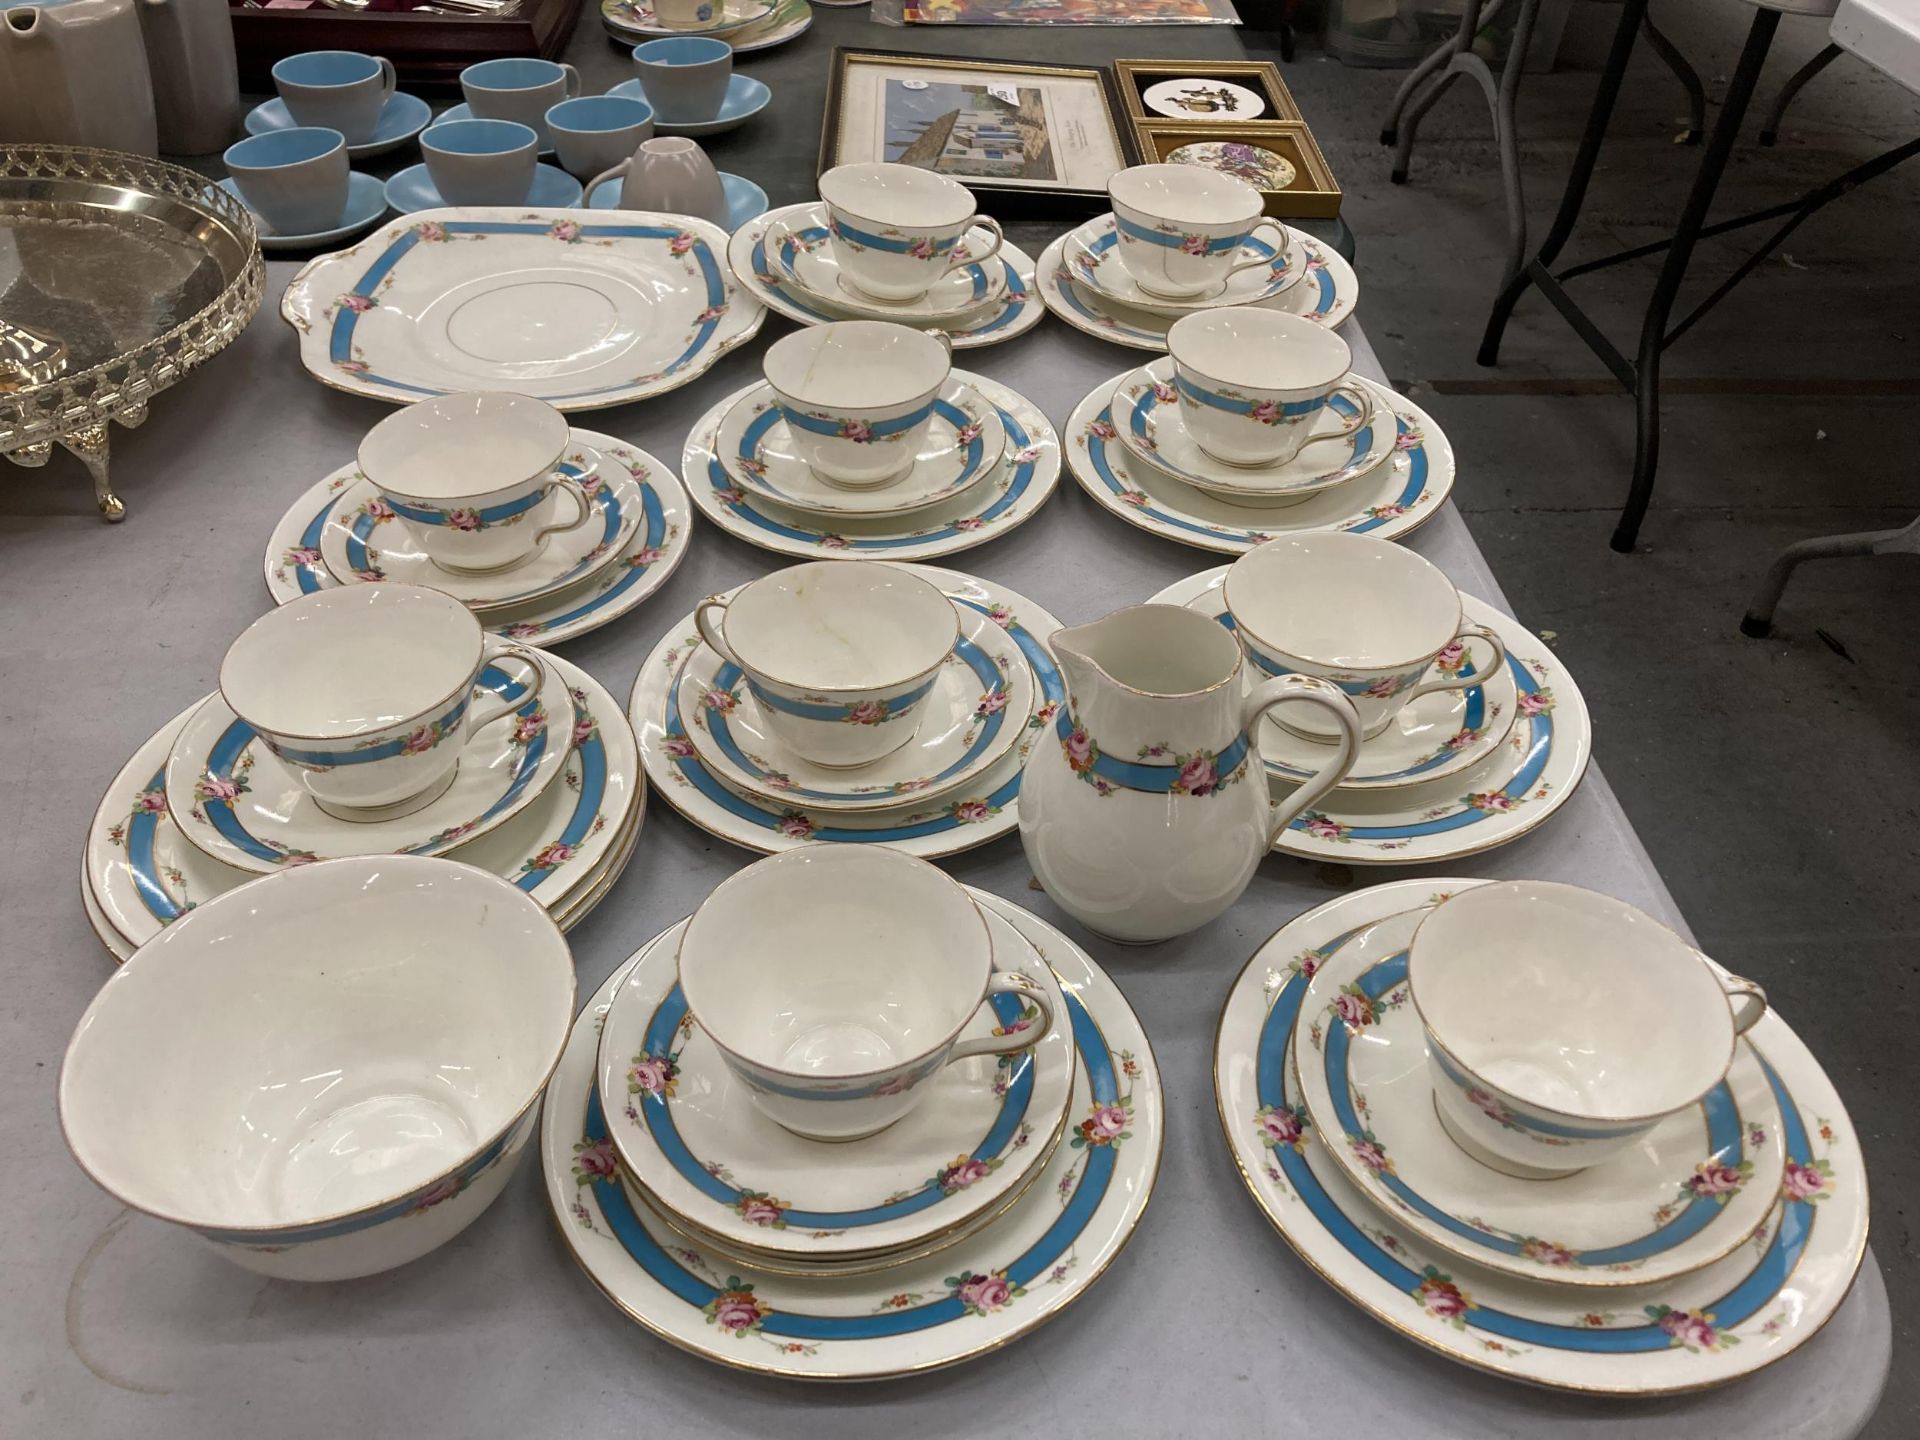 A LARGE QUANTITY OF VINTAGE CROWN STAFFORDSHIRE CHINA CUPS, SAUCERS, SIDE PLATES, A CREAM JUG, SUGAR